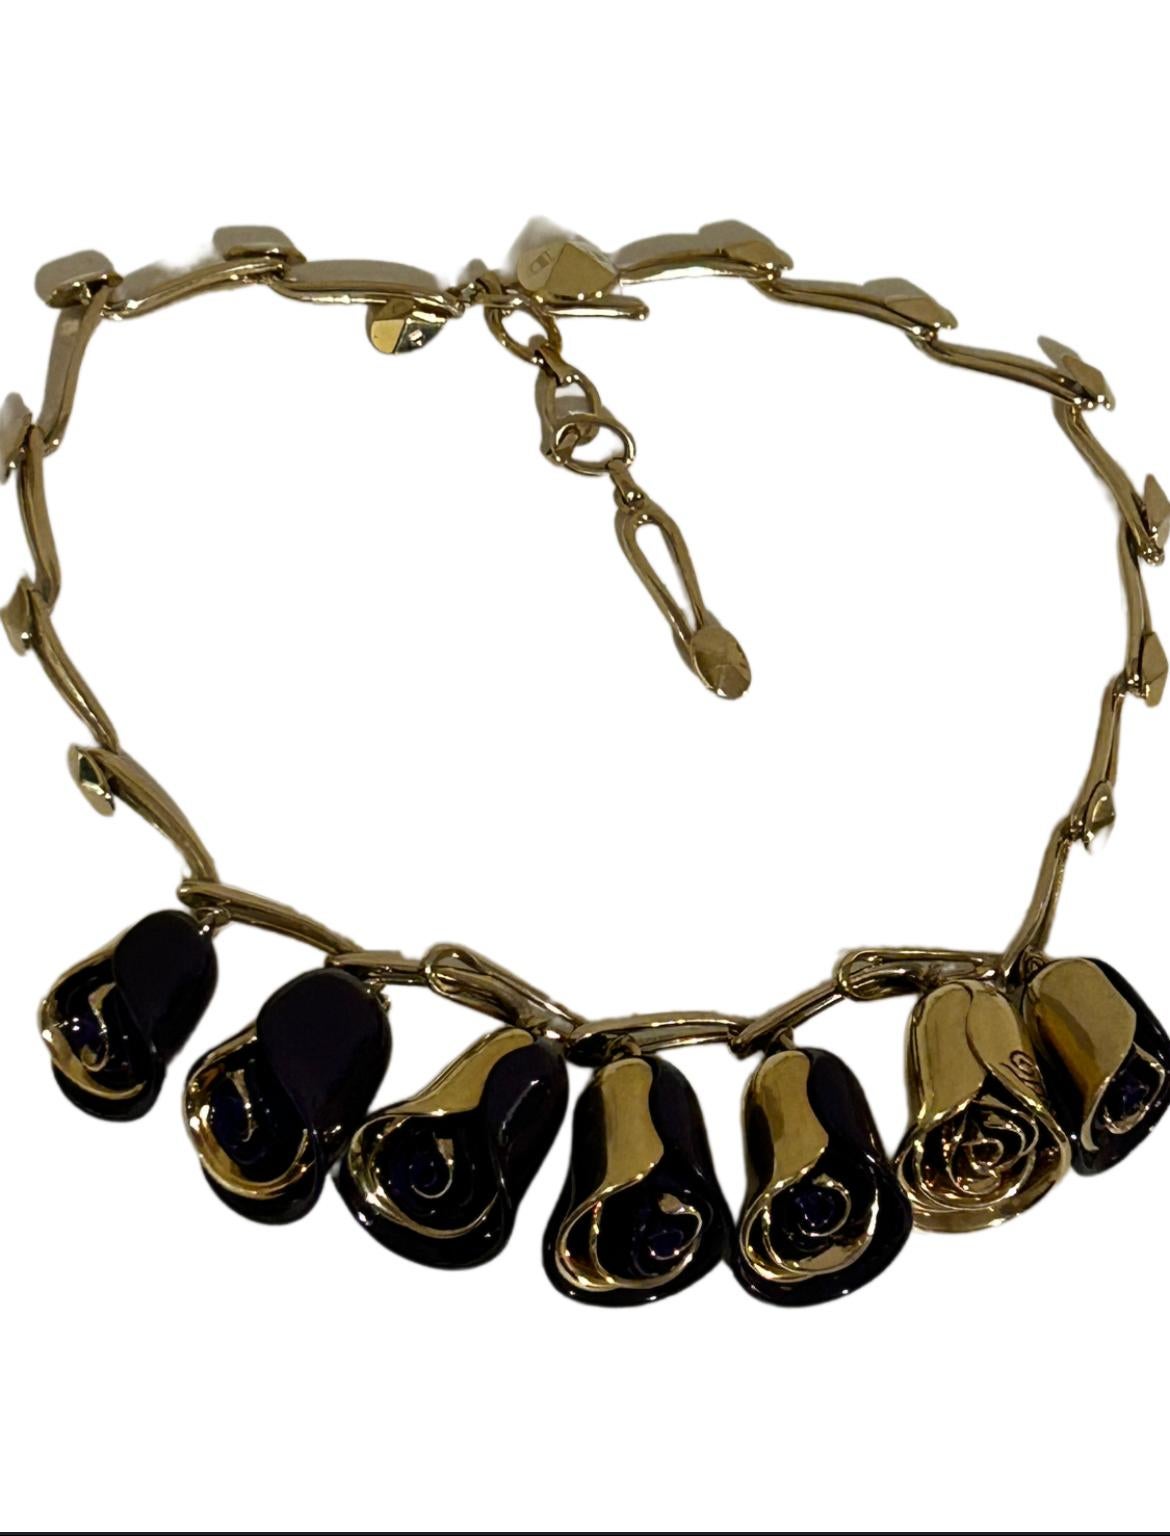 Here for you is this splendid vintage rose bud flower necklace by Christian Dior.

It's a very unusual piece, and I've not seen another like this.

With its beautiful purple enamel and gold metal designed as rose bud flowers this is a unique piece